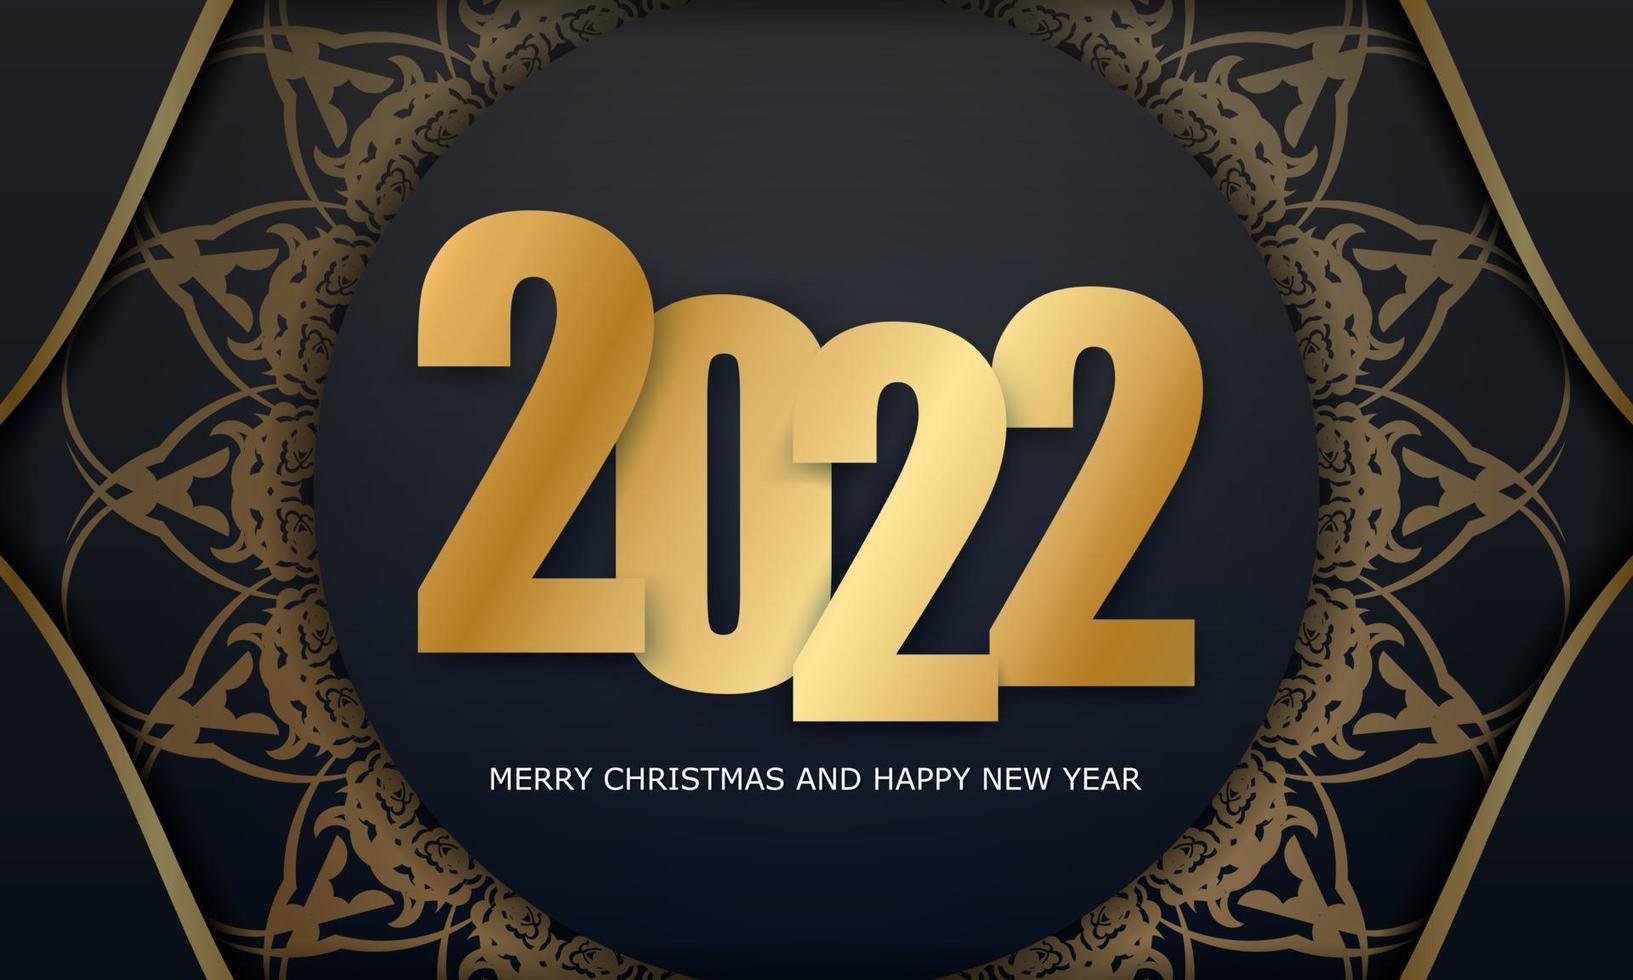 2022 postcard merry christmas and happy new year black color with winter gold ornament vector